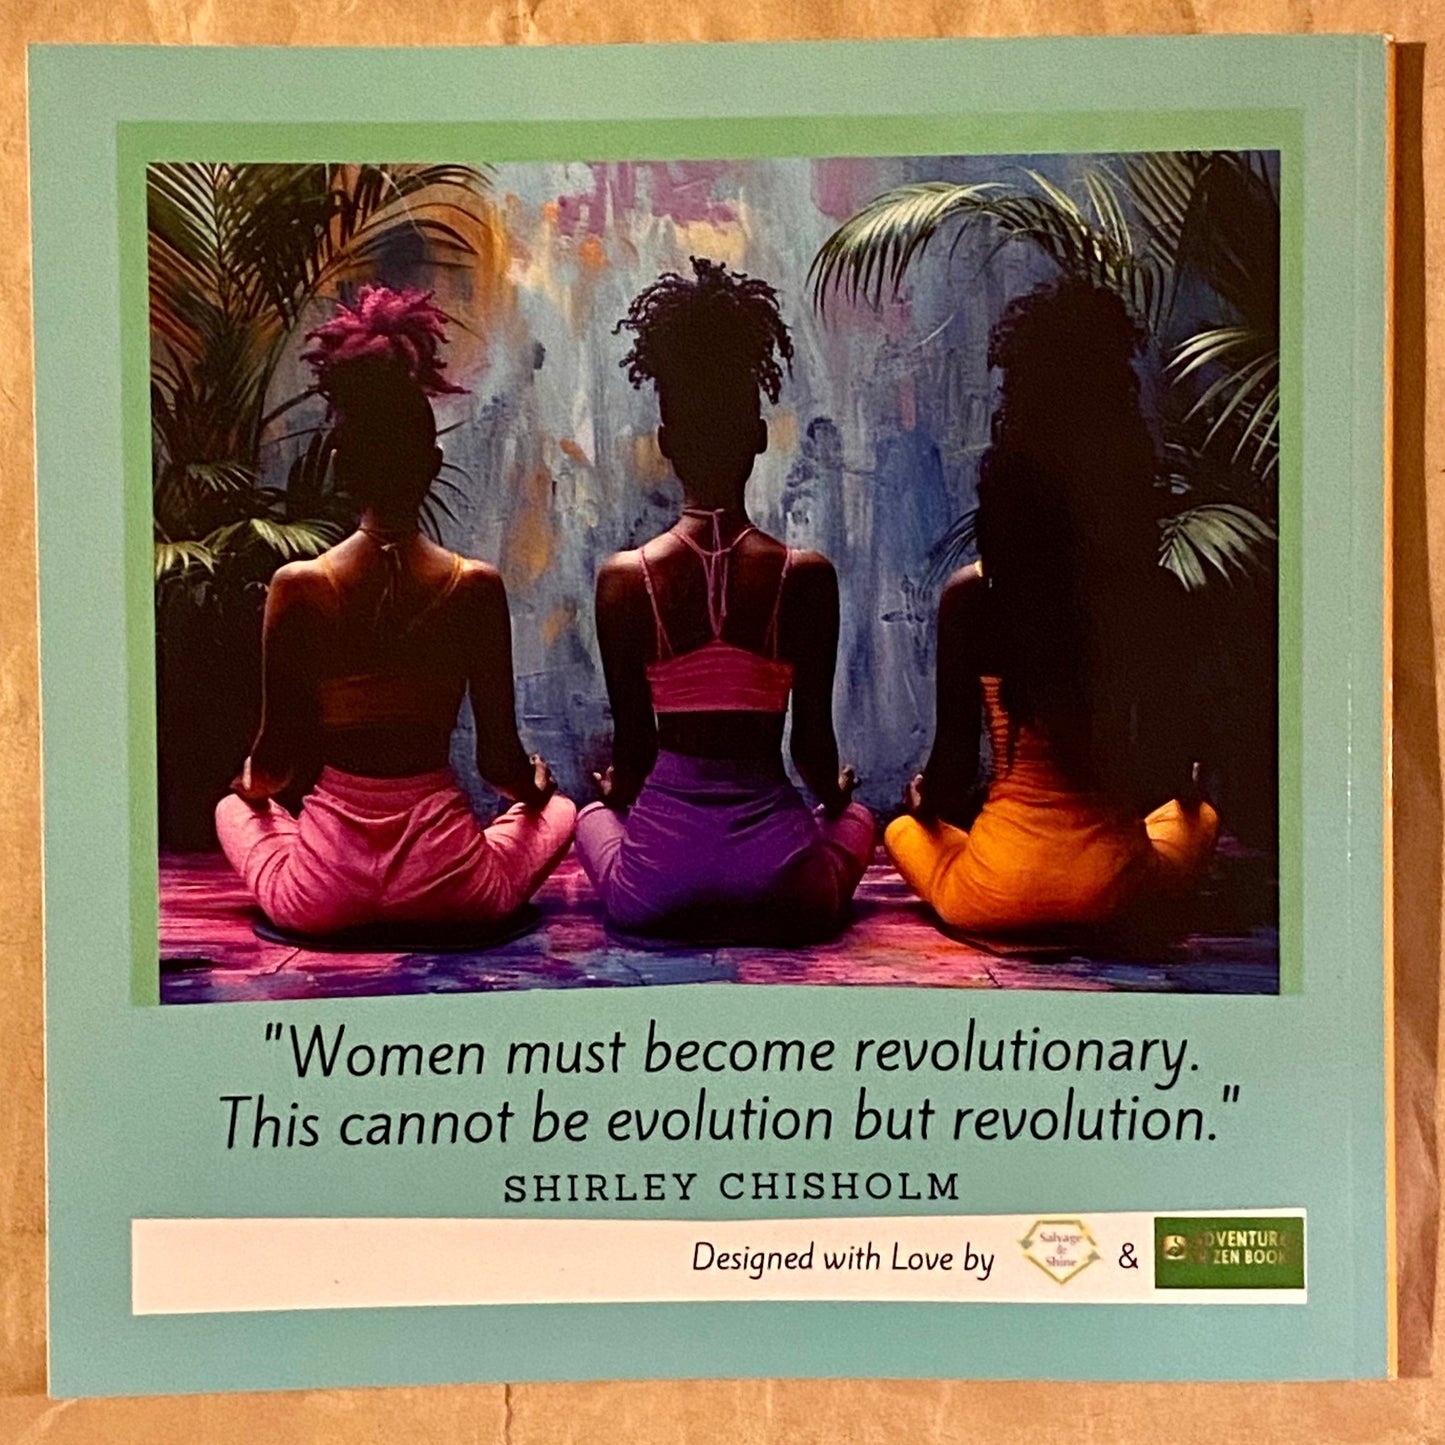 This is the back cover that has a picture of three black women meditating with a quote by Shirley Chisholm that reads "Women must become revolutionary. This cannot be evolution but revolution."